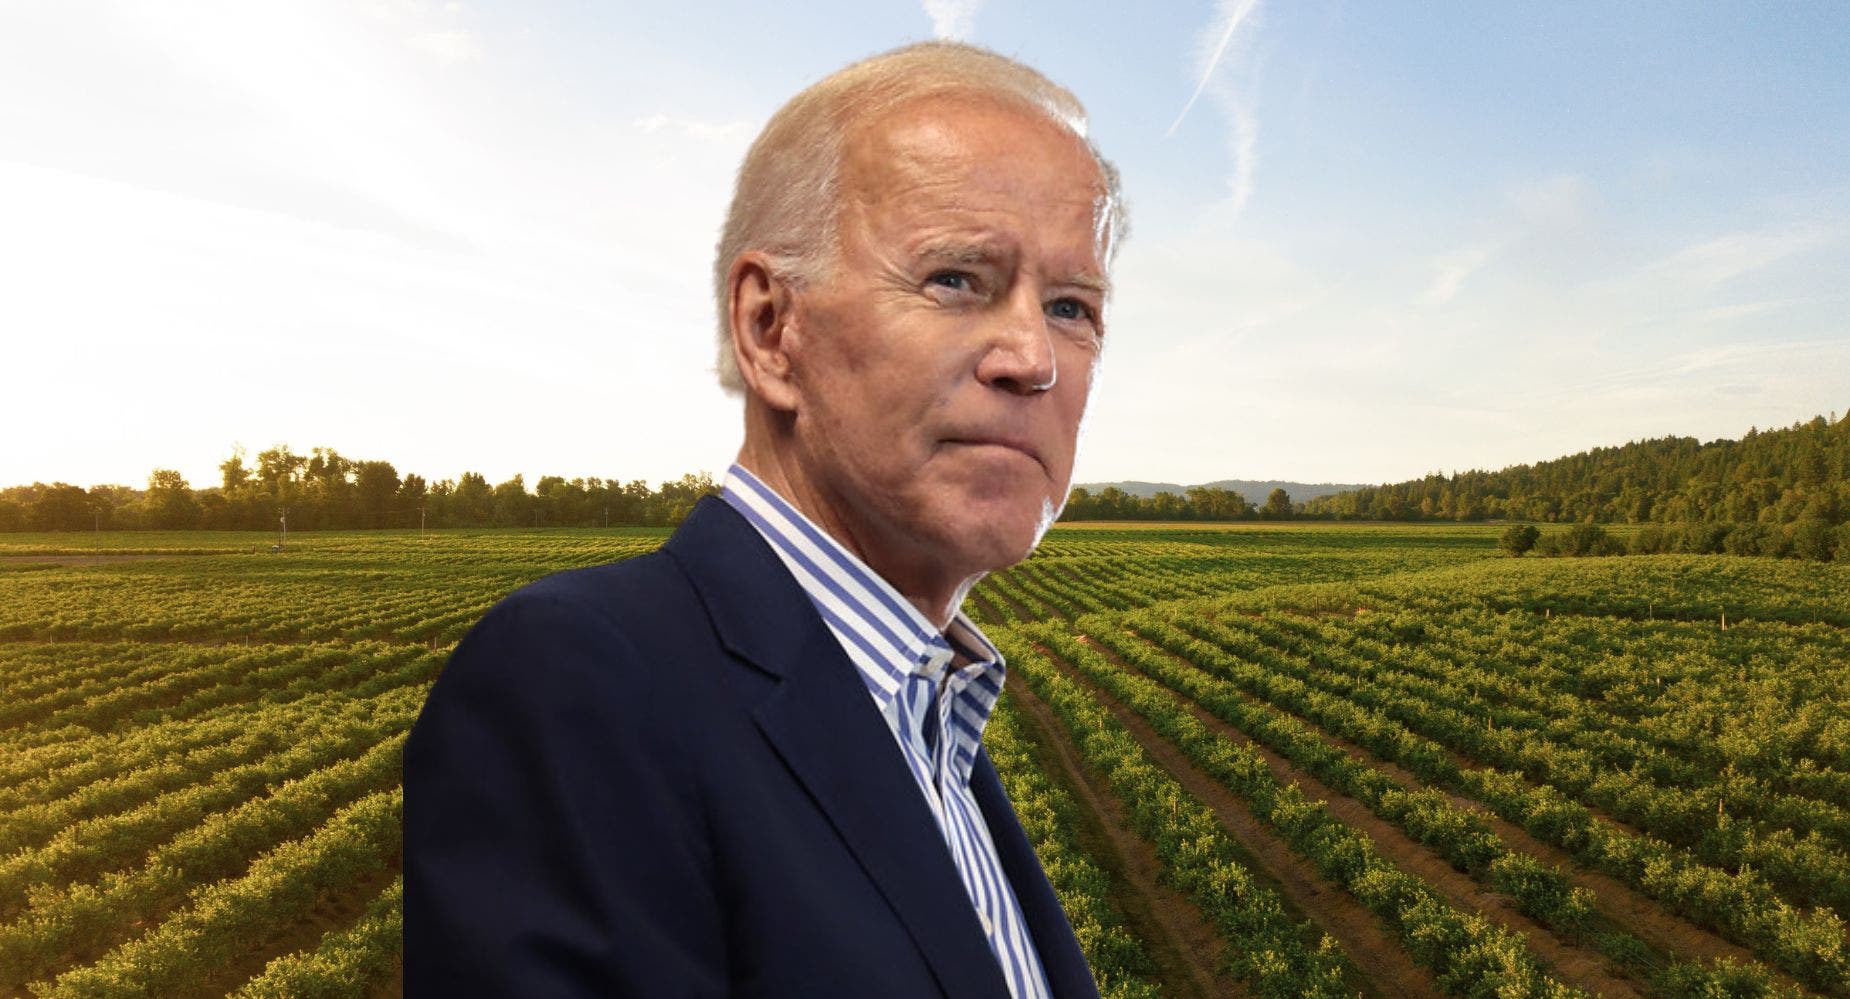 3 Under The Radar Dividend Stocks In Agriculture As $20B From Biden Inflation Bill Flows To Farms